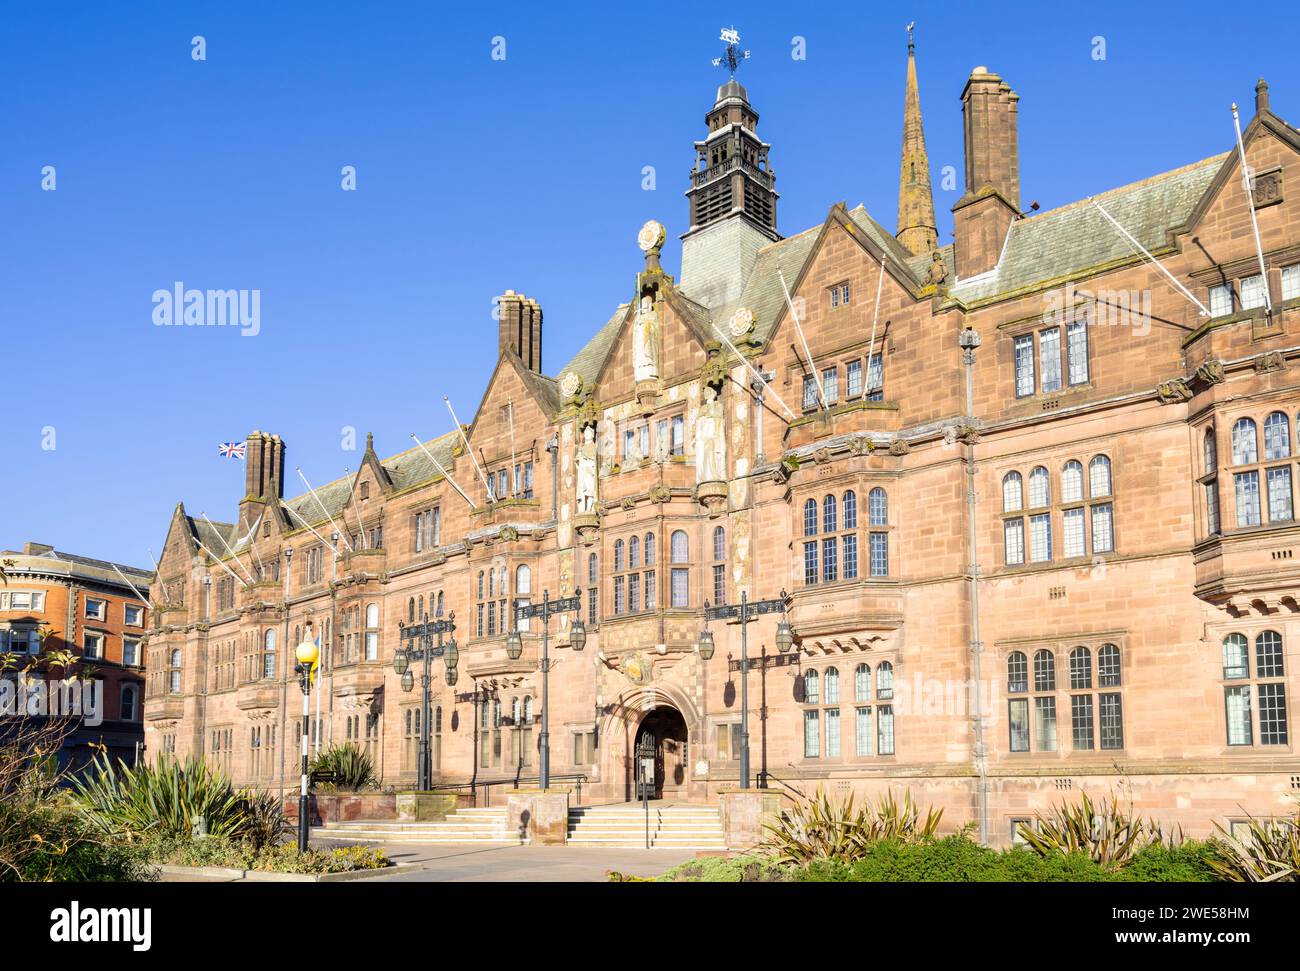 Coventry Council House Coventry ein Stadthaus im Tudor Revival Stil Stadthalle des Coventry City Council Coventry Warwickshire England Großbritannien GB Europa Stockfoto